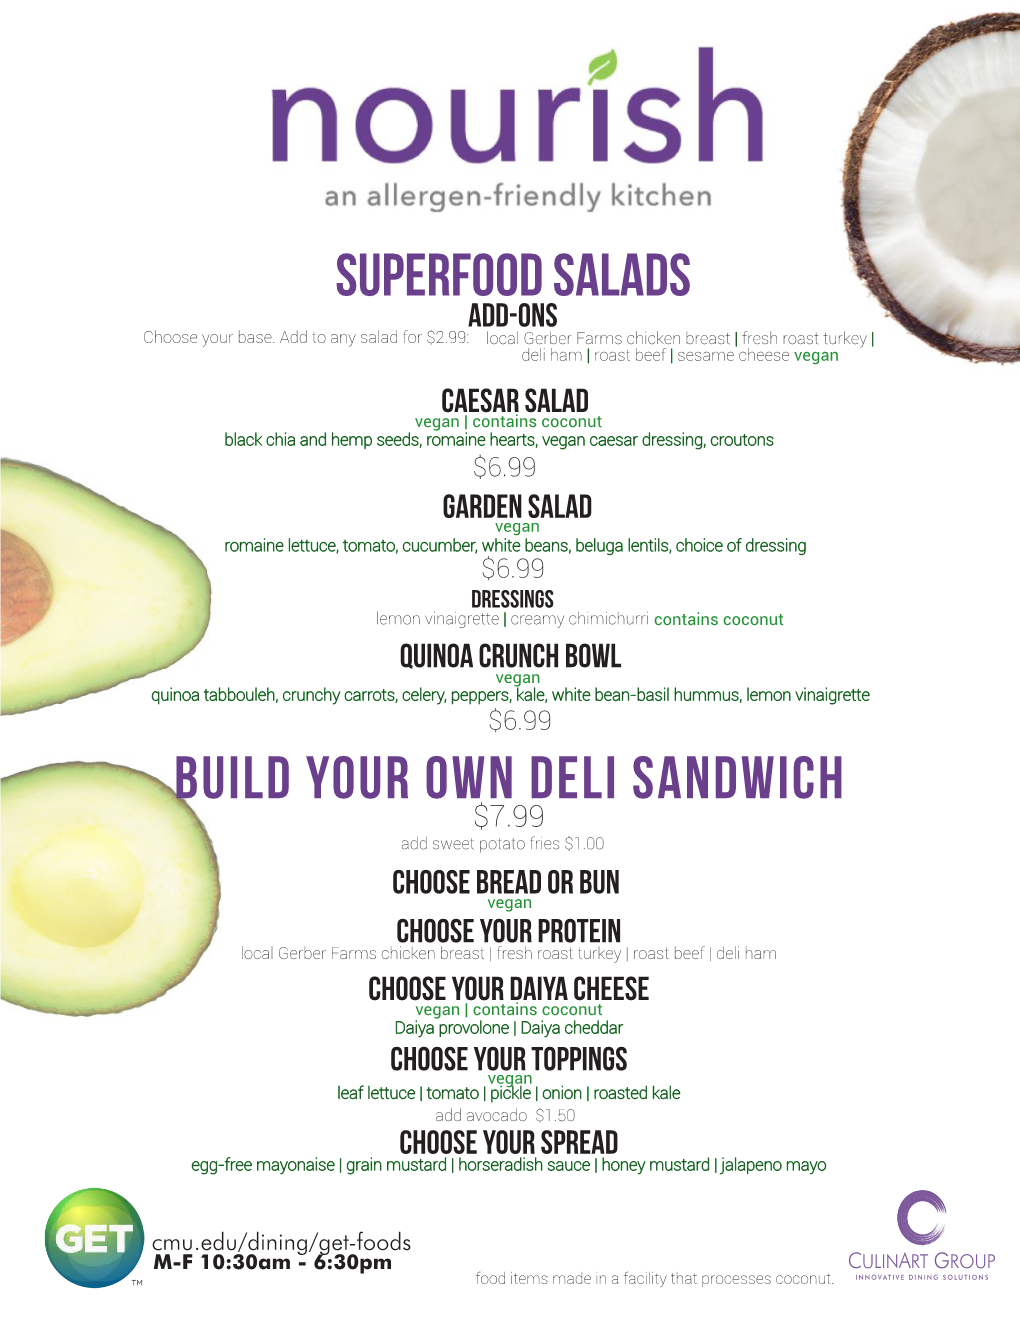 Build Your Own Deli Sandwich SUPERFOOD SALADS